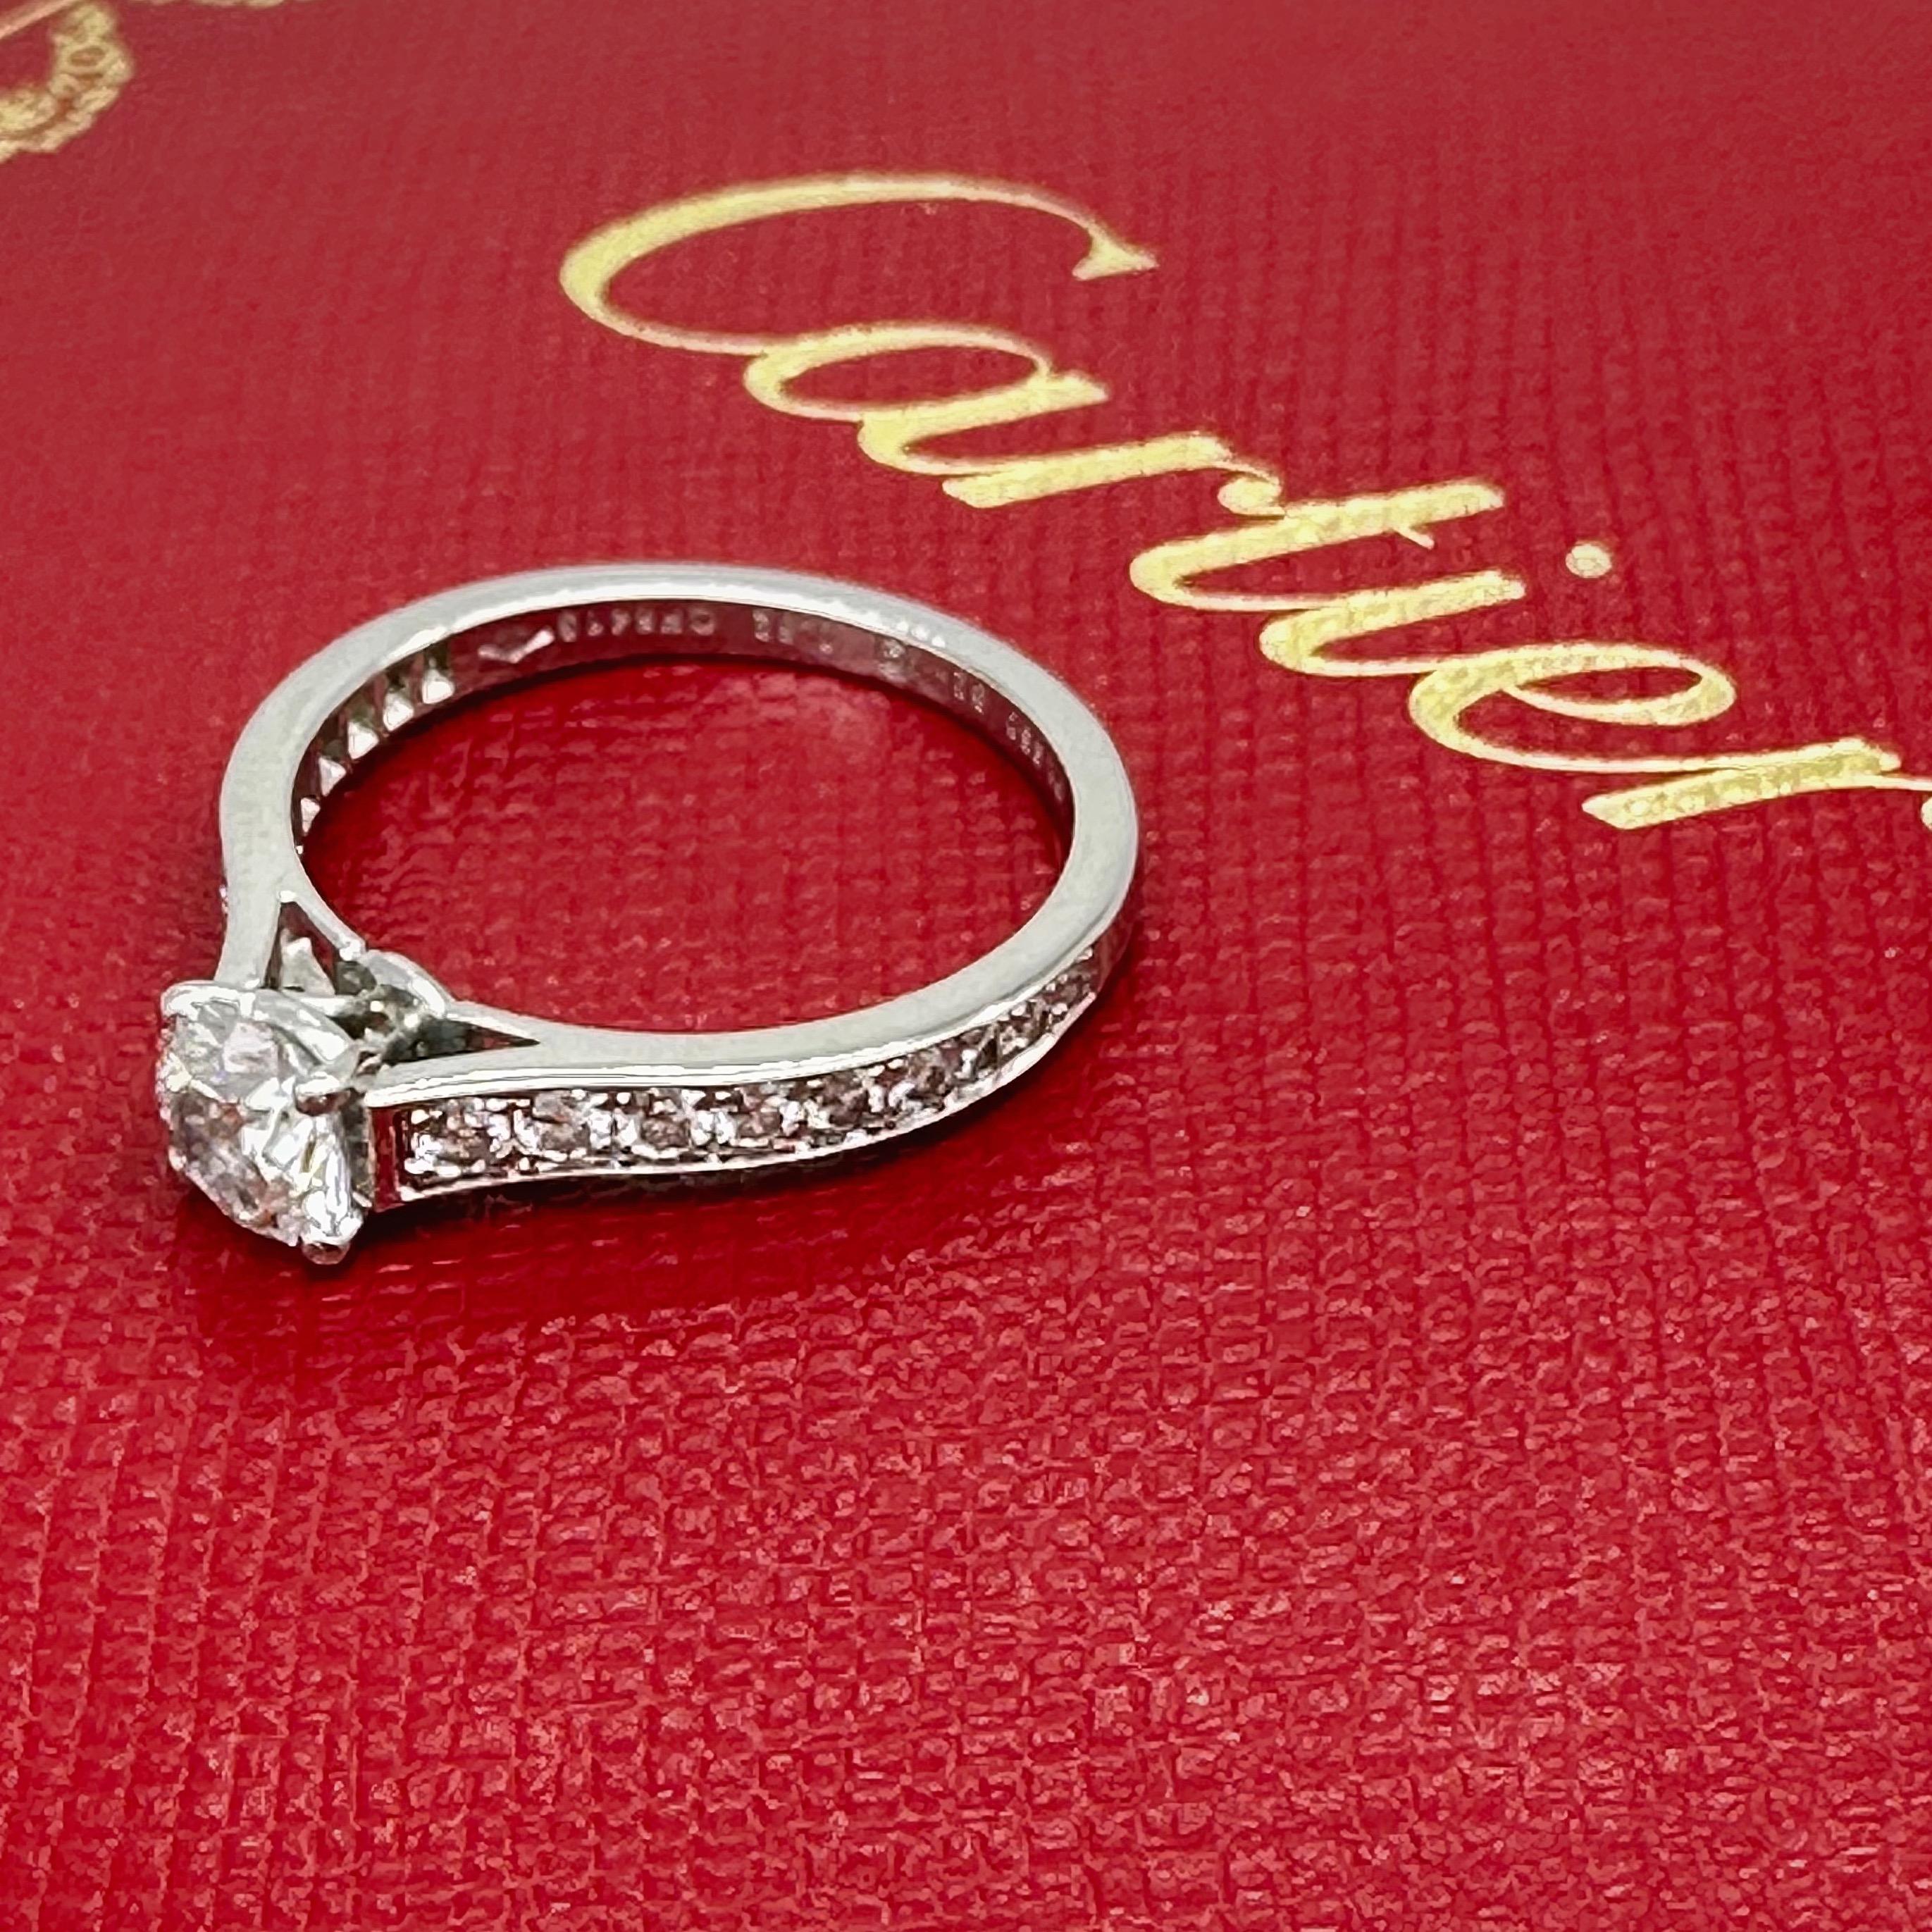 Cartier 1895 Round Diamond 0.88 tcw Engagement Ring in Platinum GIA COA Box For Sale 3